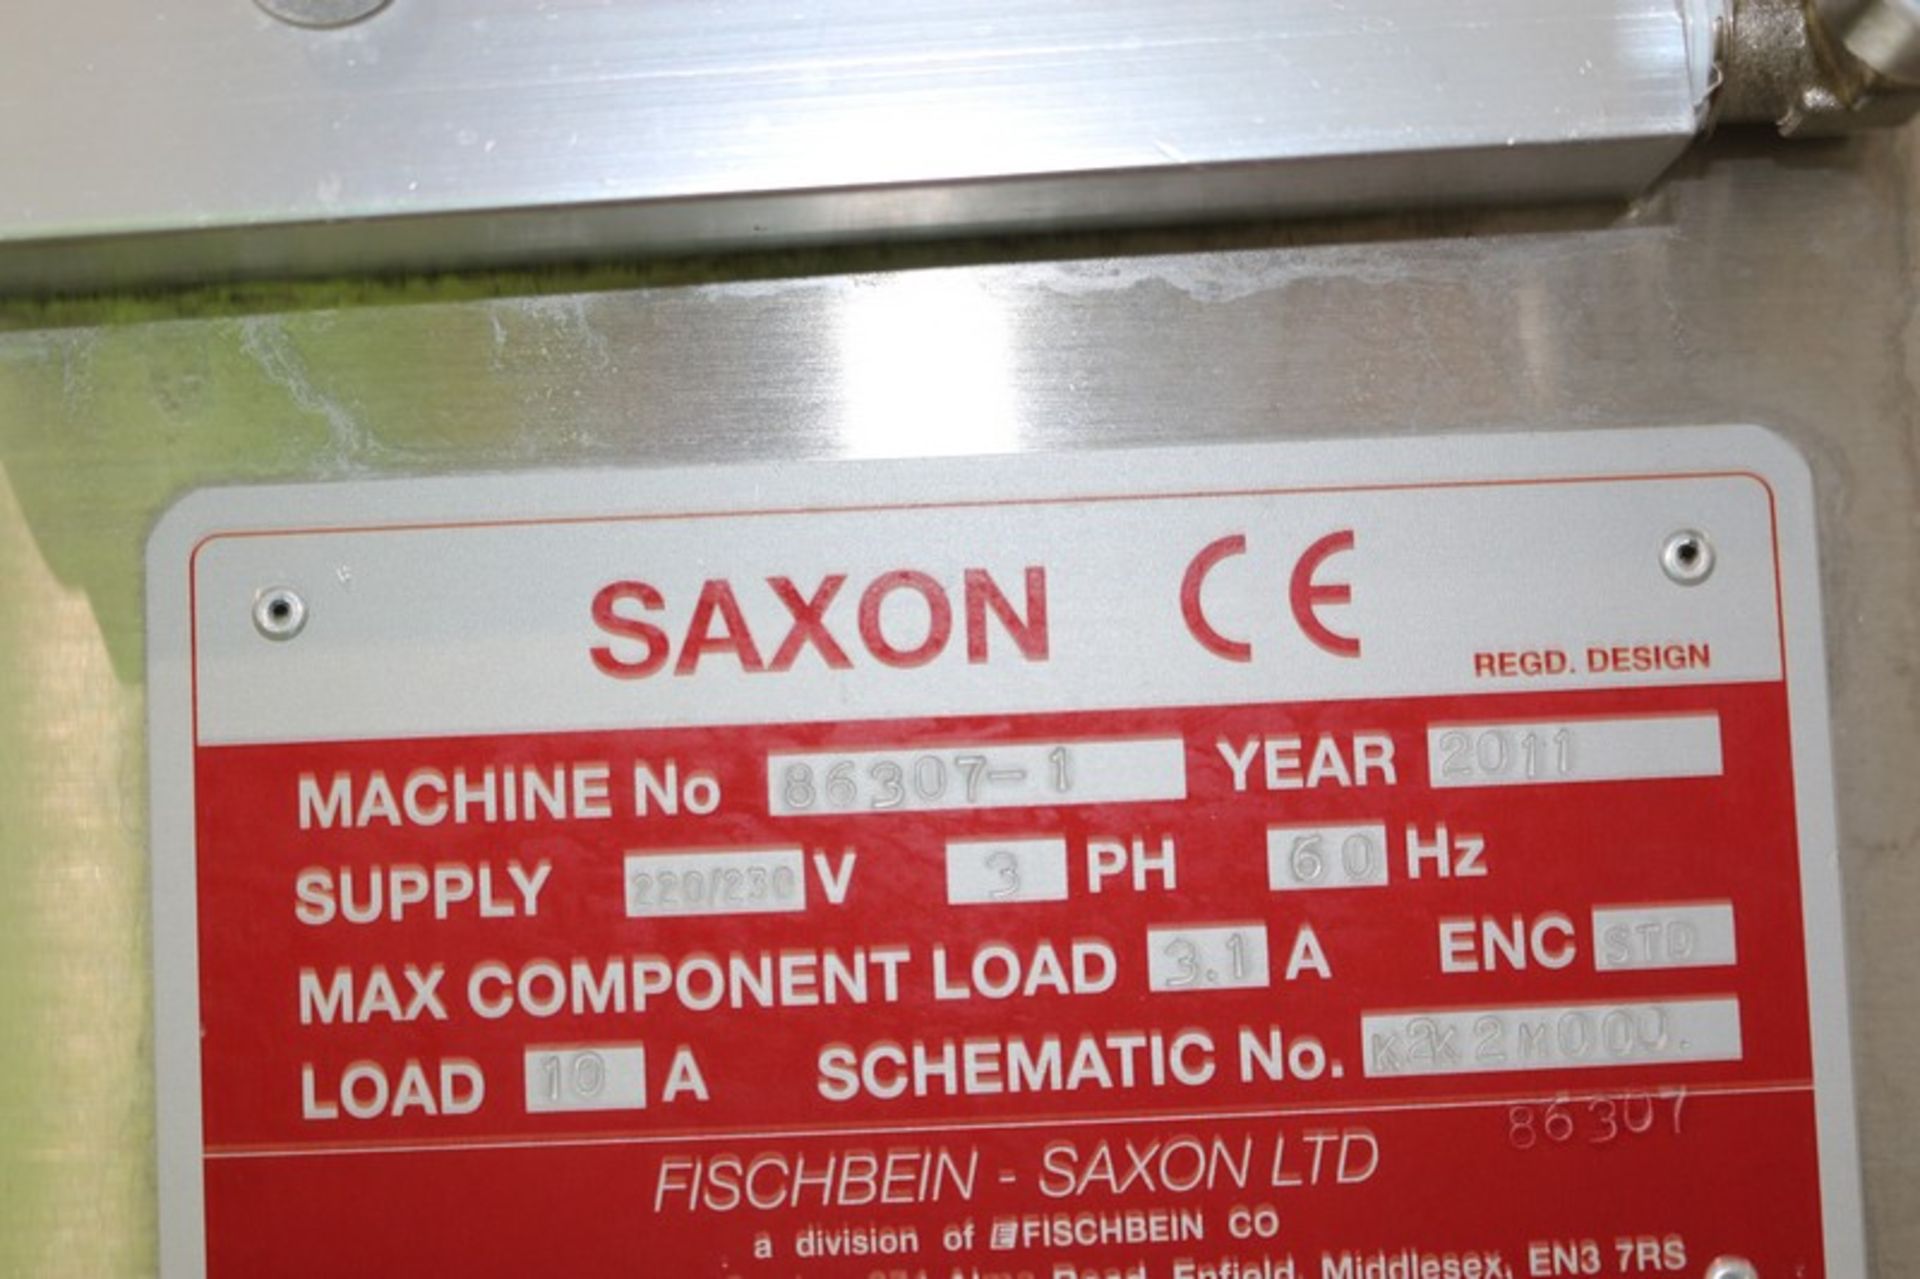 2011 Saxon Sealer,M/N 86307-1, 220/230 Volts, 3 Phase, with Aprox. 6" W Belt, Mounted S/S Frame ( - Image 8 of 9